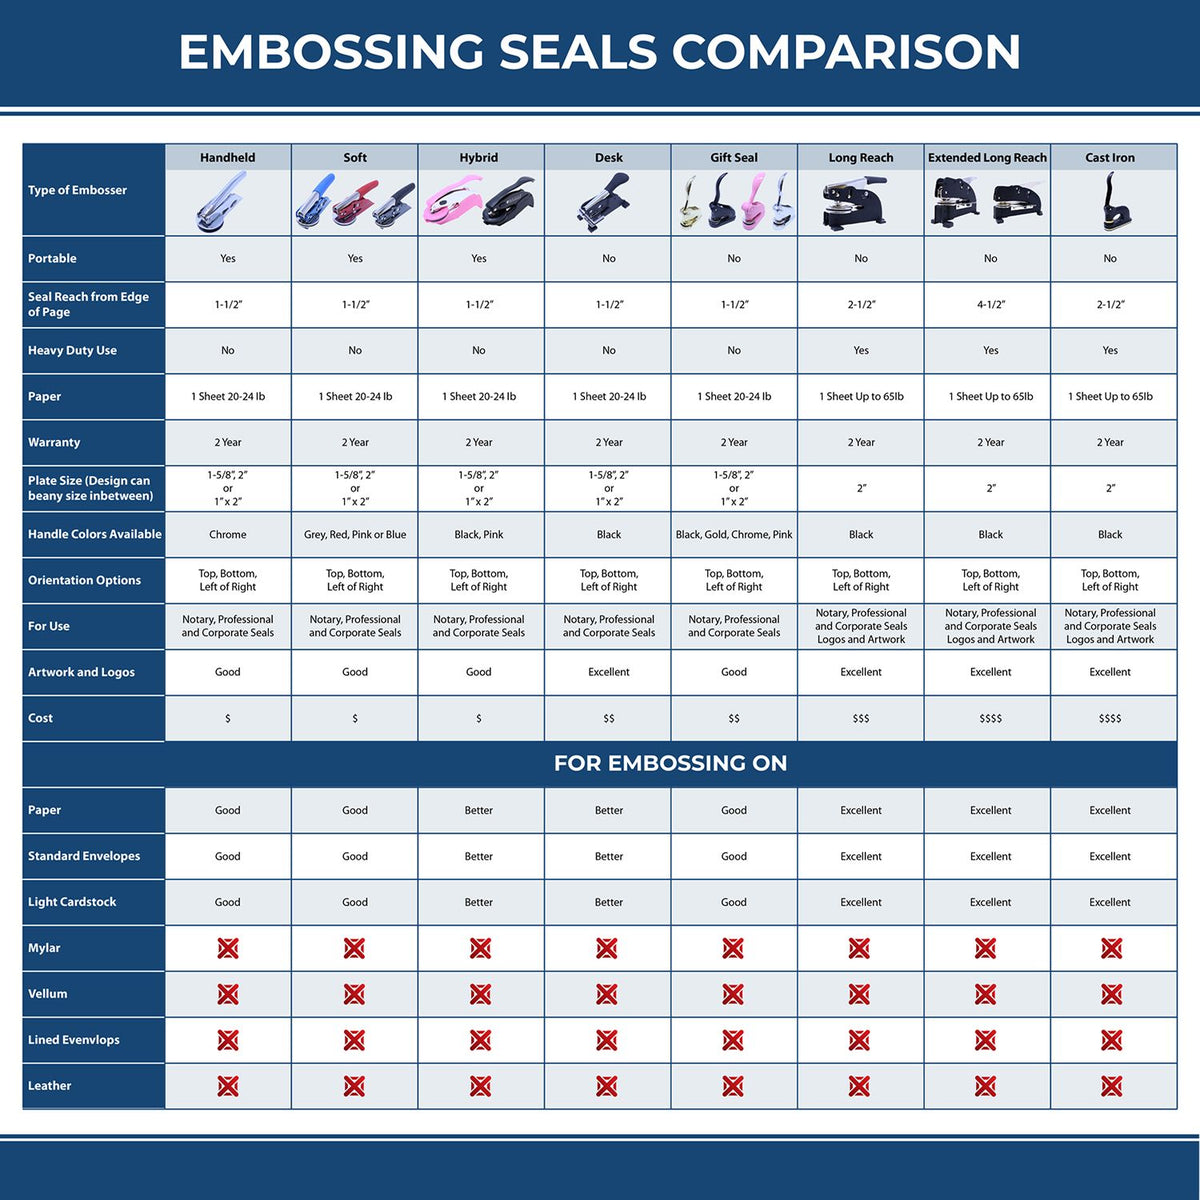 A comparison chart for the different types of mount models available for the Soft Massachusetts Professional Engineer Seal.